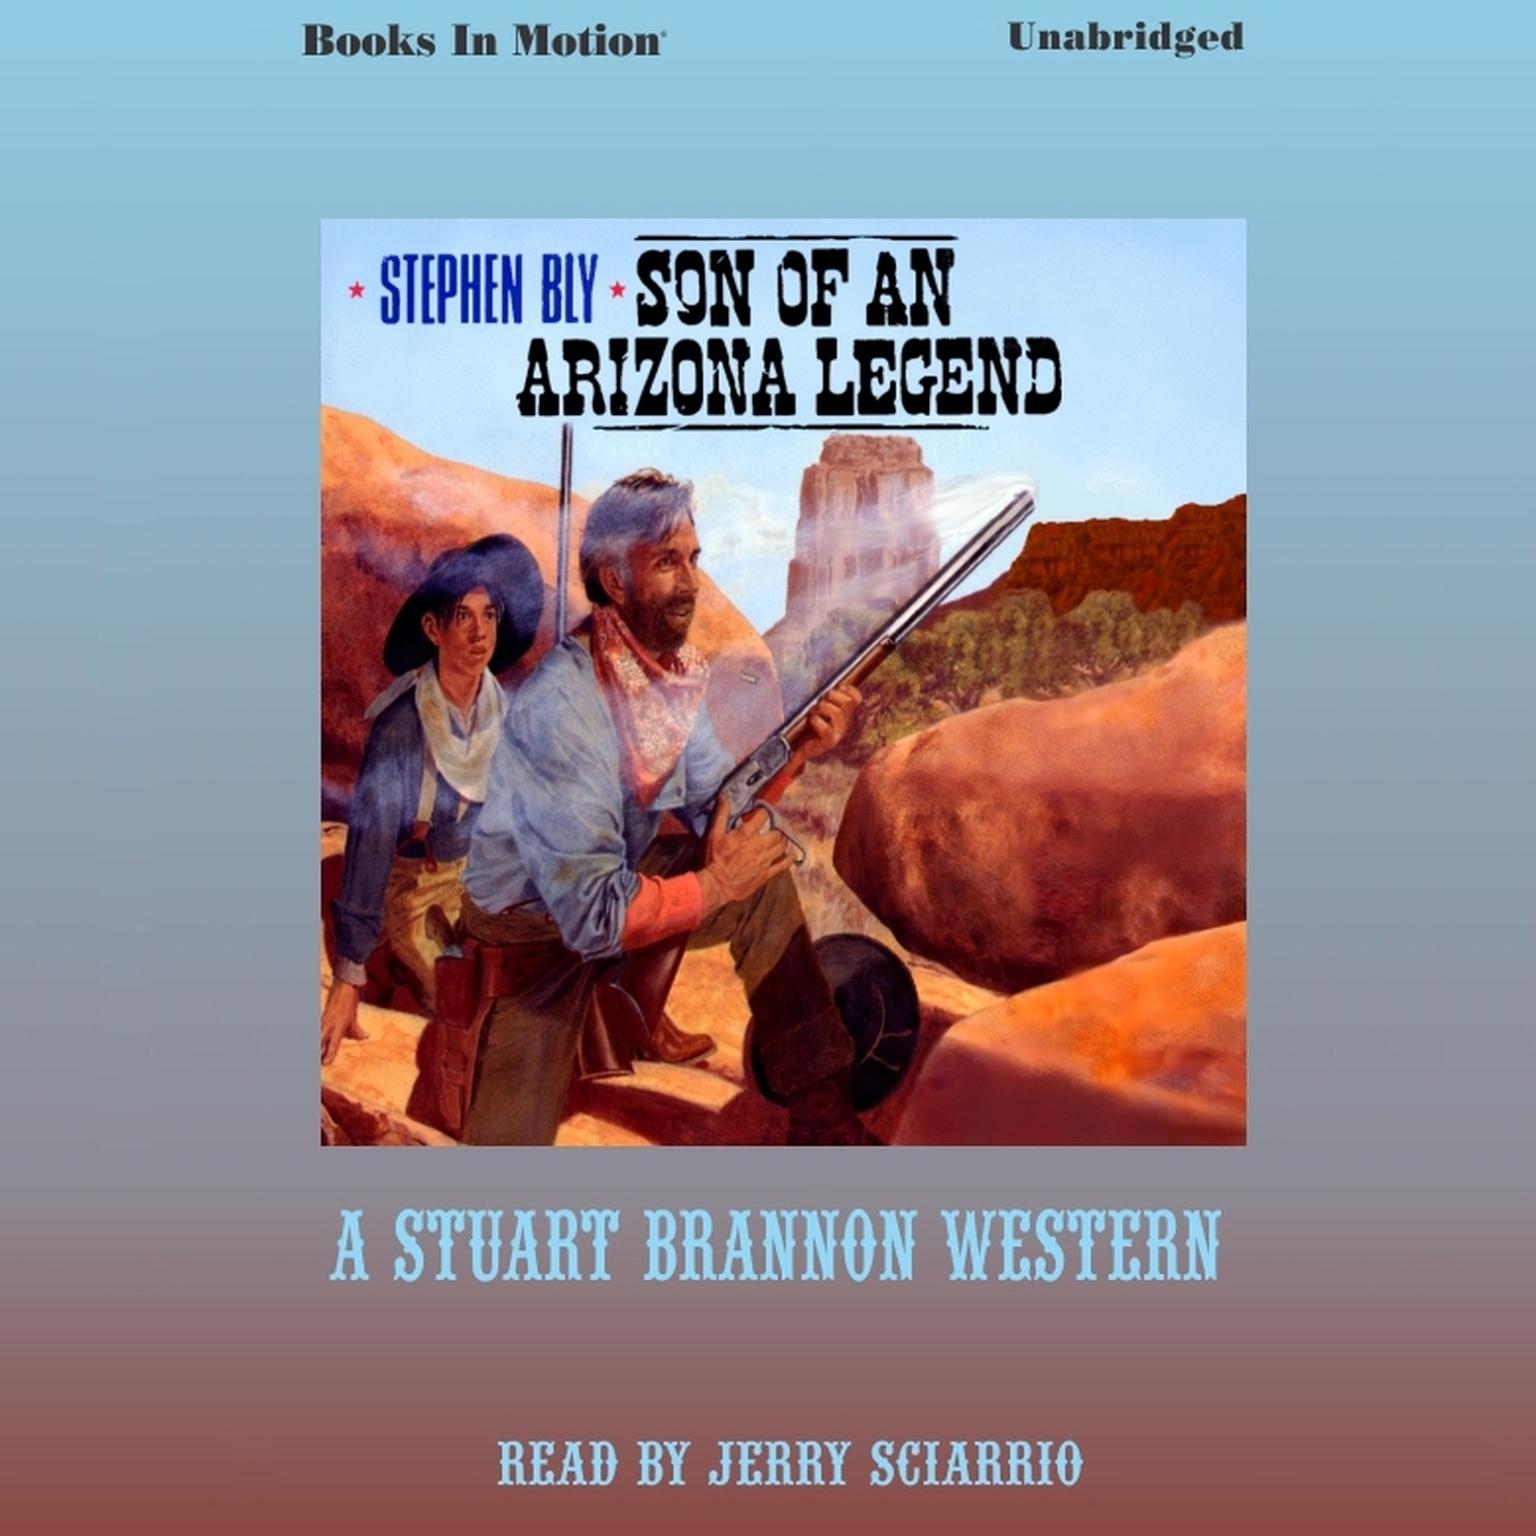 Son of an Arizona Legend Audiobook, by Stephen Bly